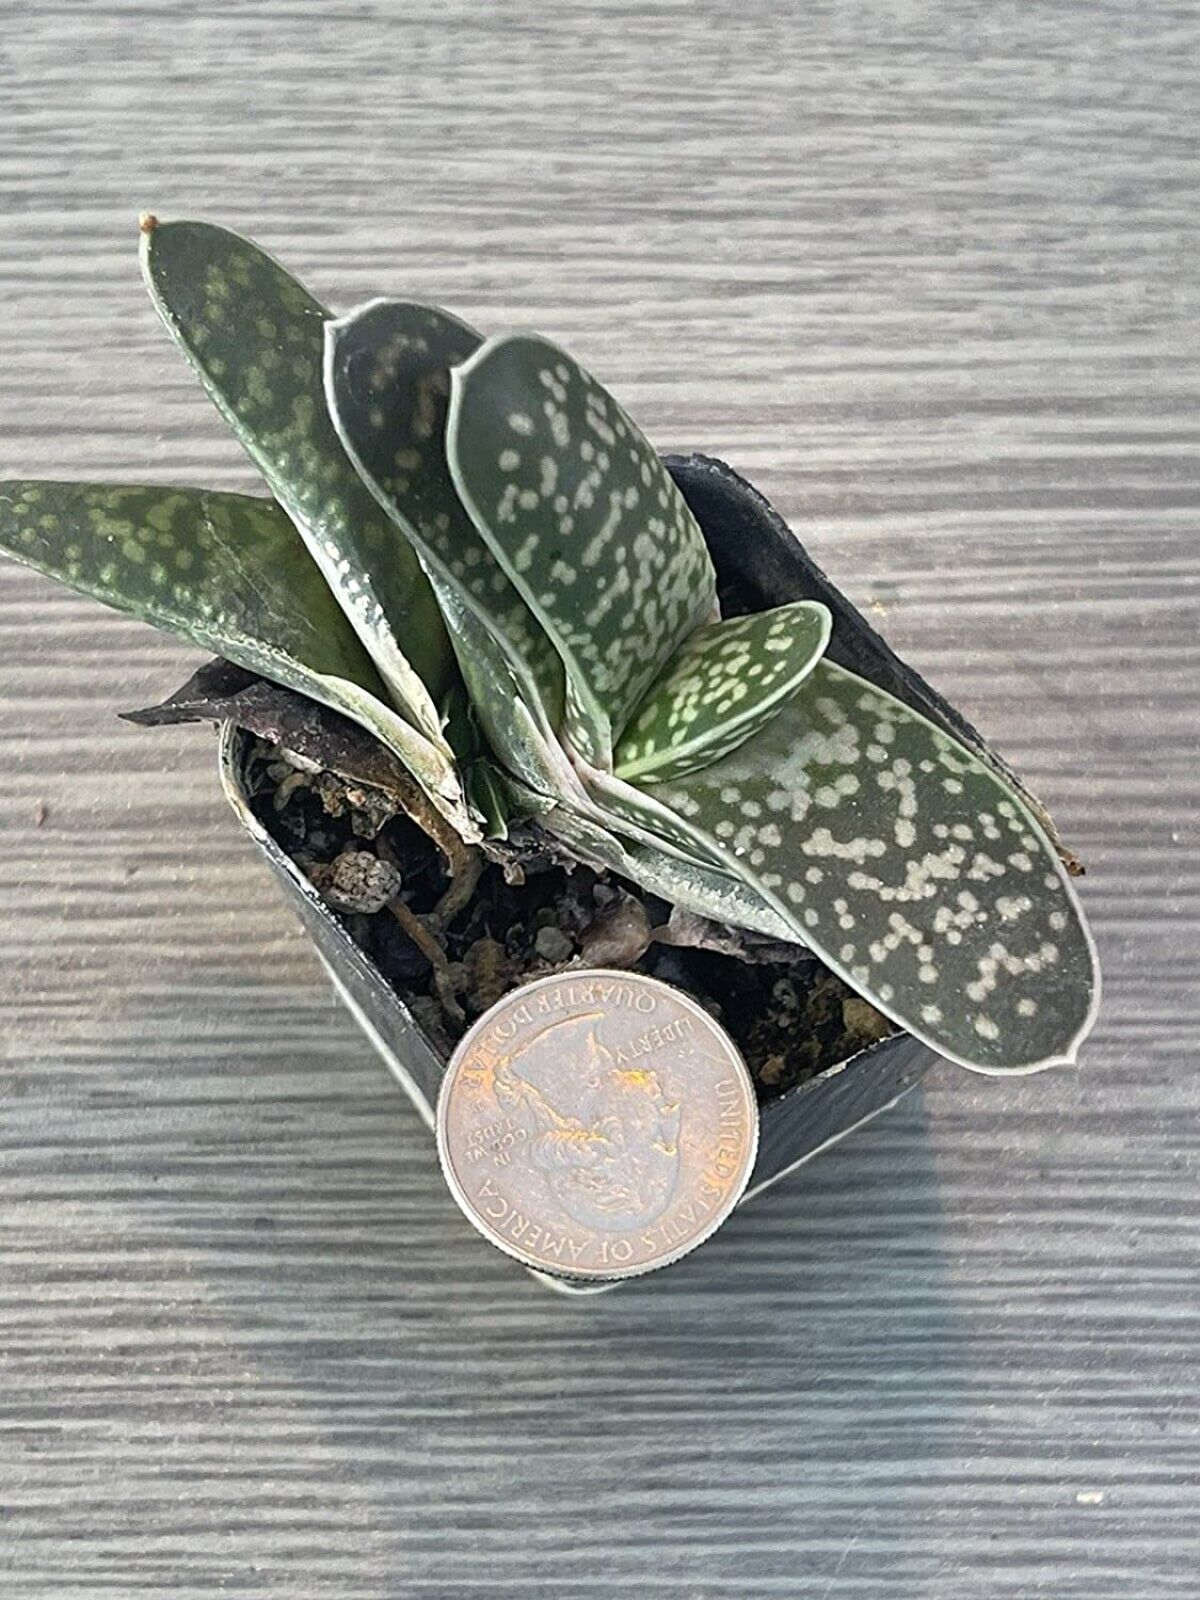 Gasteria Obliqua growing in a pot with a coin.